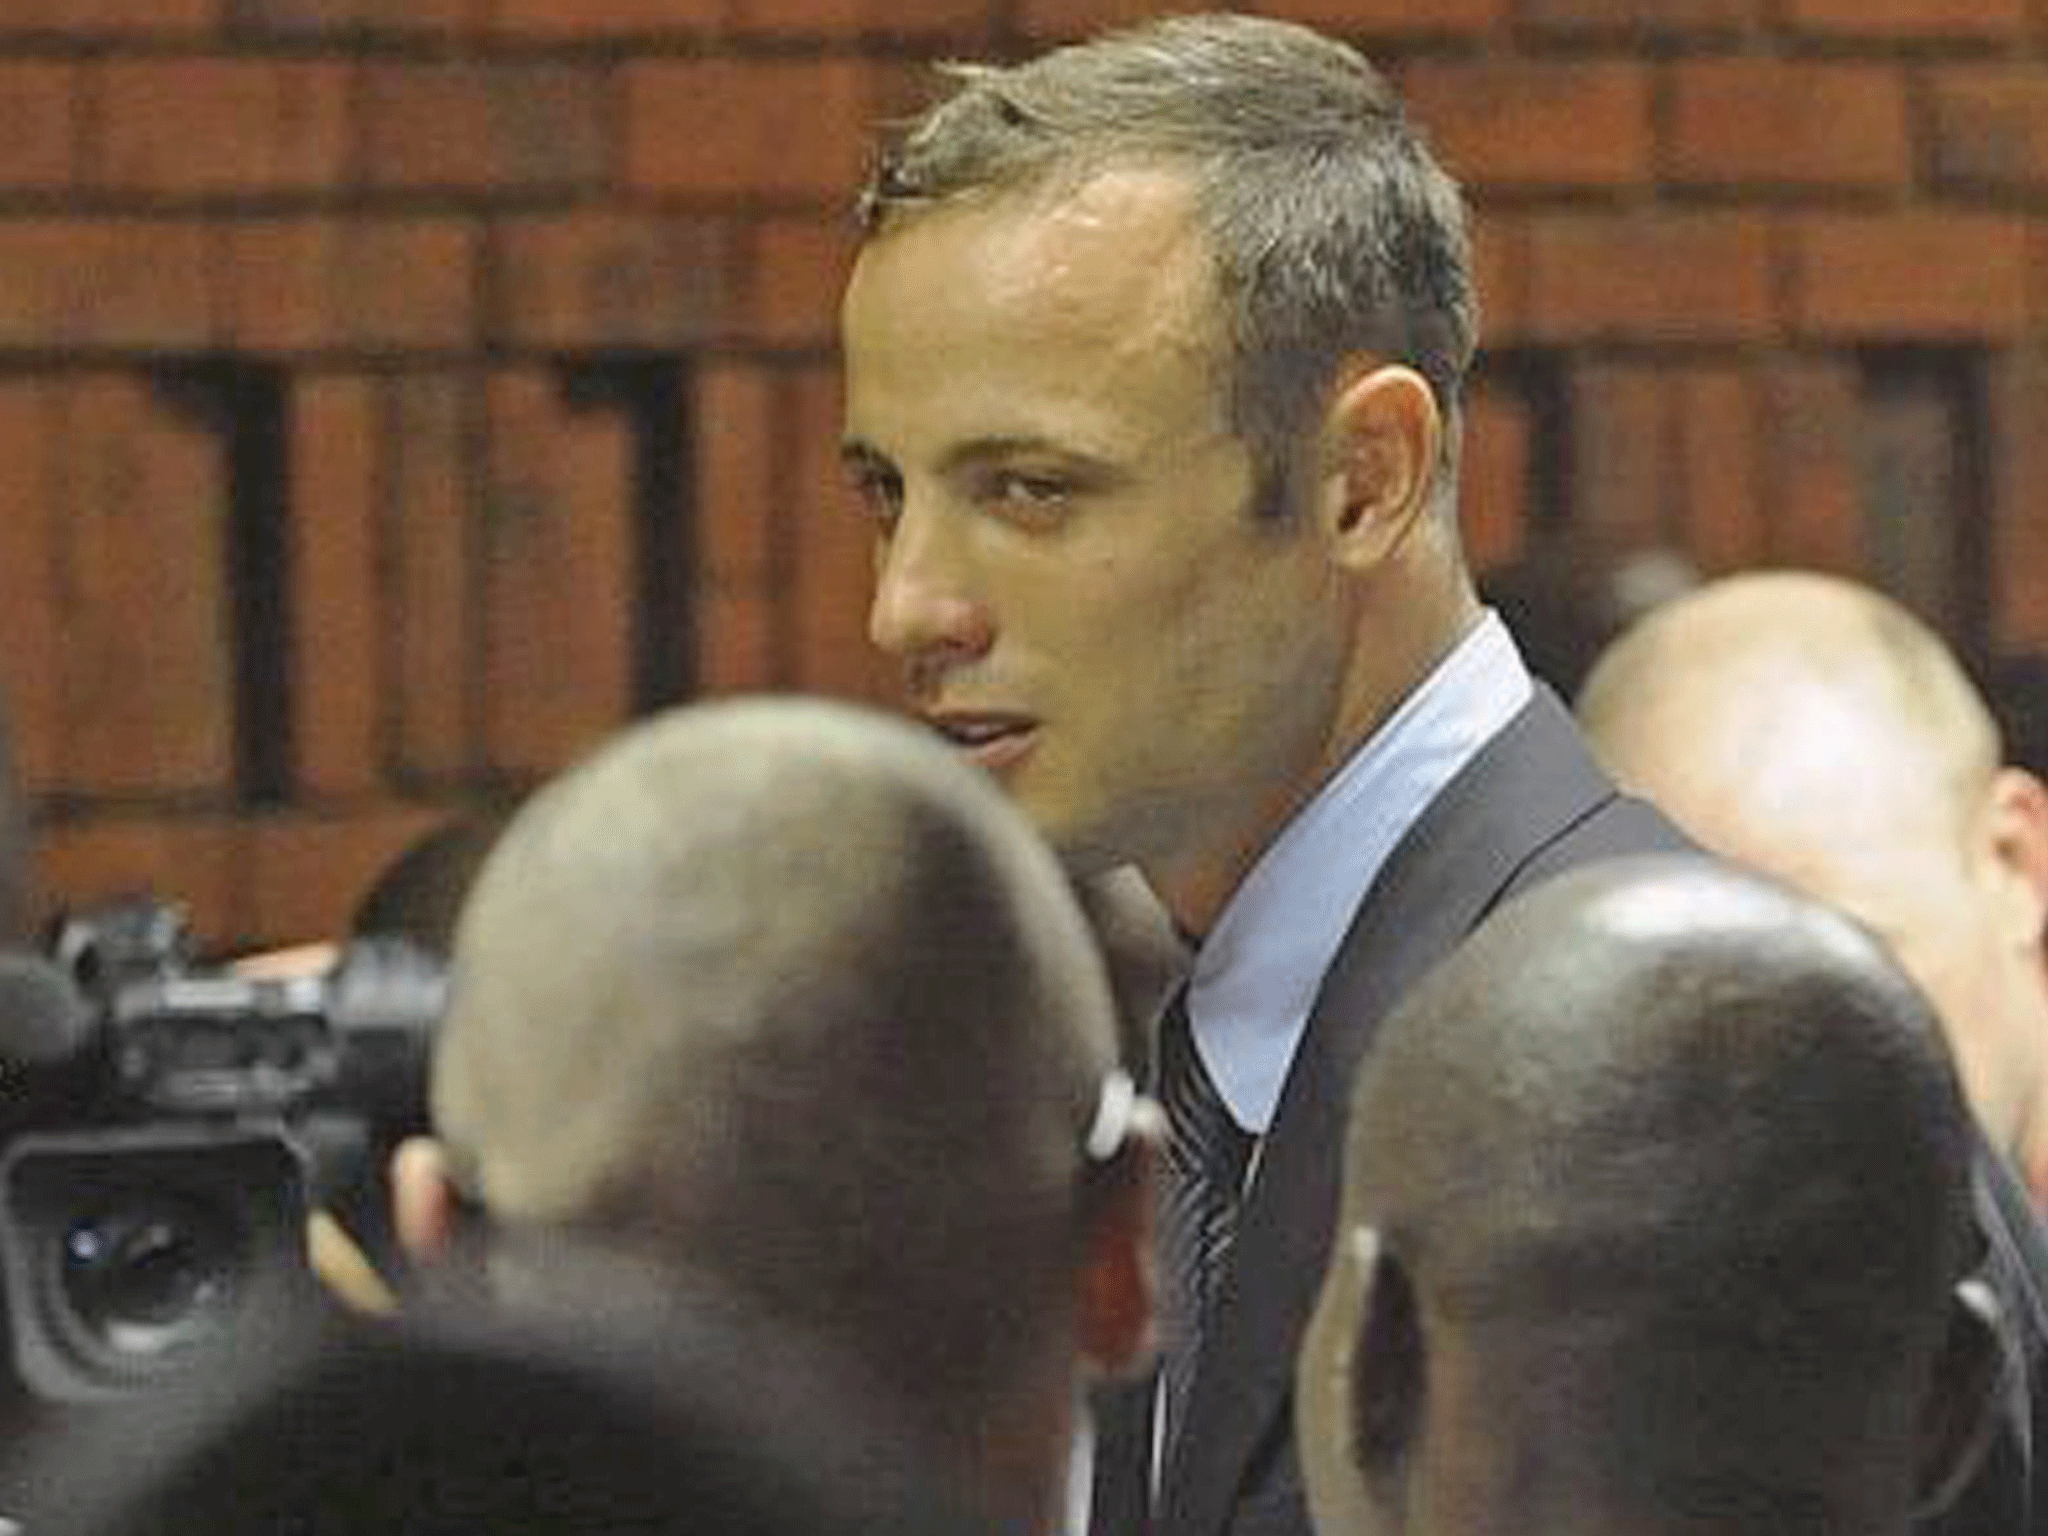 Oscar Pistorius in the Pretoria magistrates court after spending a
night in police custody